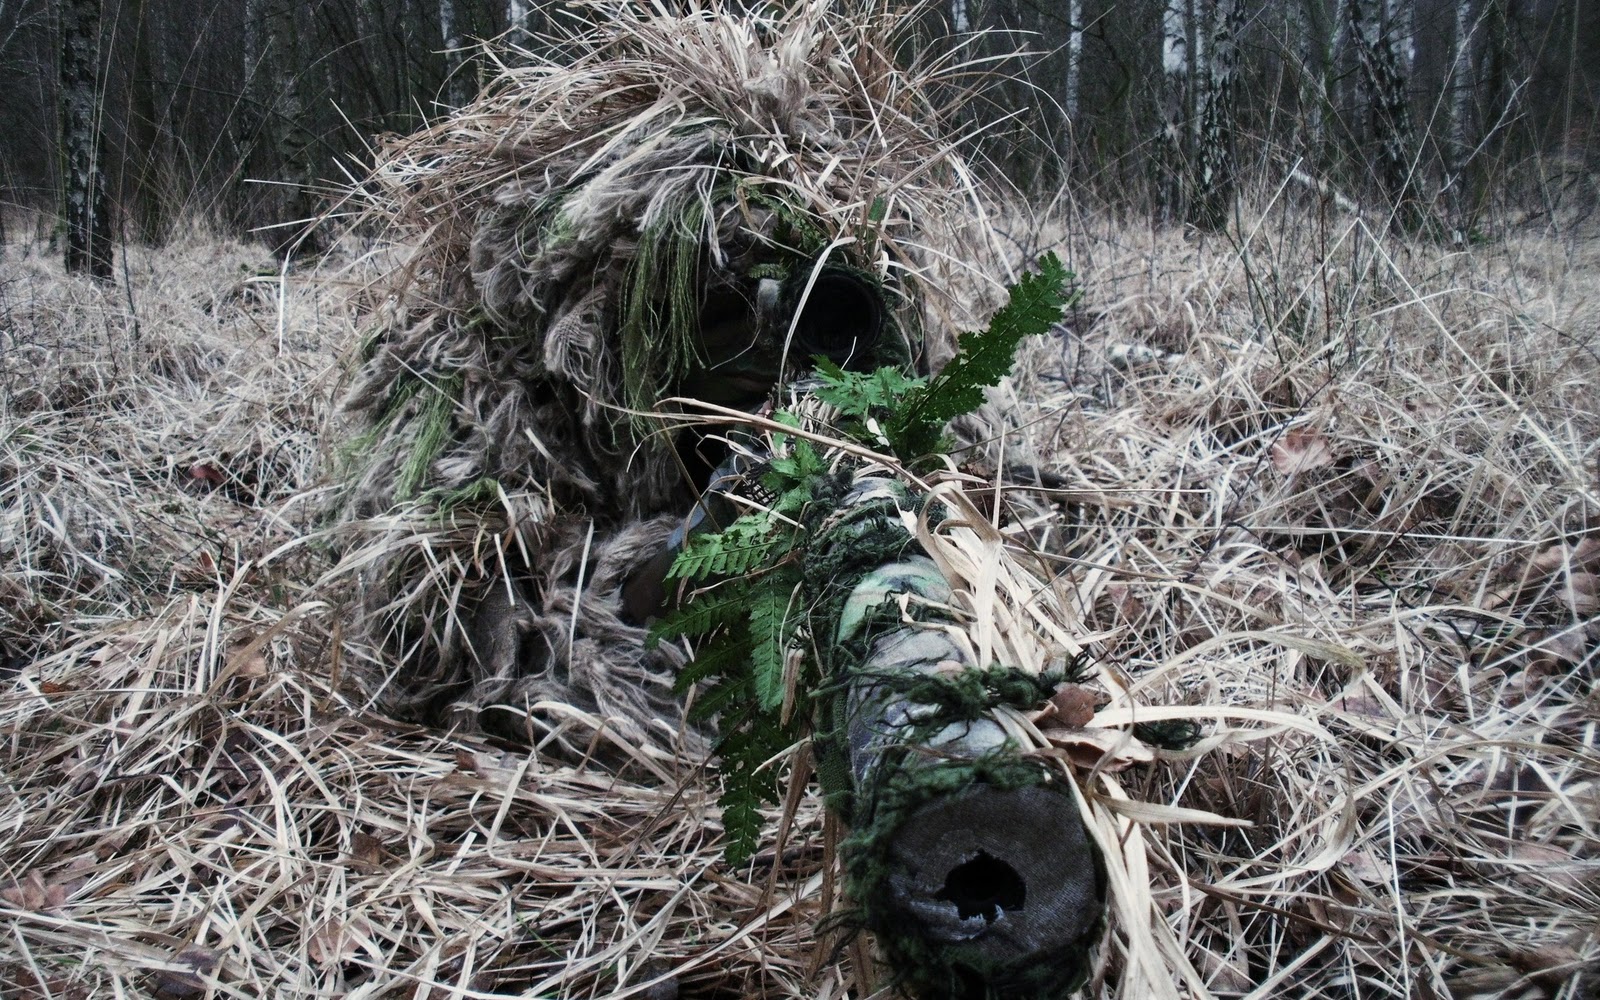  Ghillie Camo Suit Camouflage HD Wallpapers Epic Desktop Backgrounds